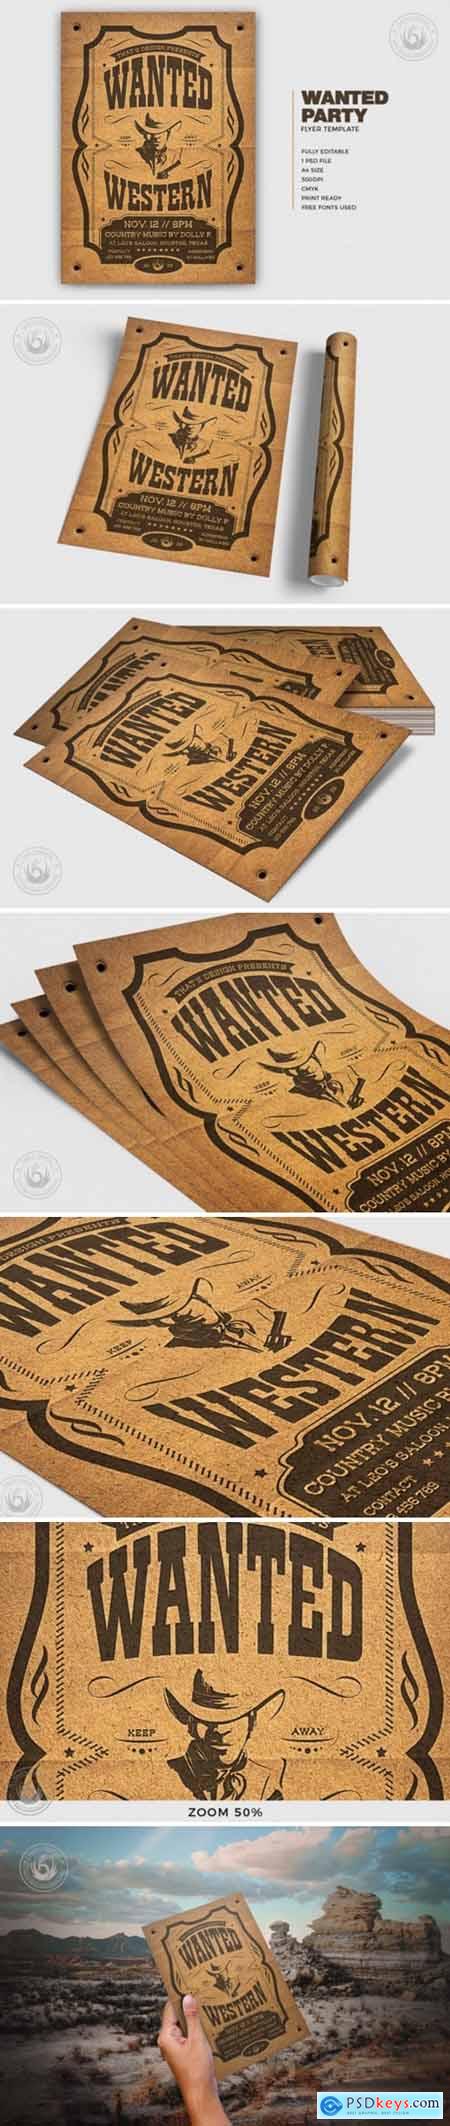 Wanted Western Party Flyer Template V2 4283813